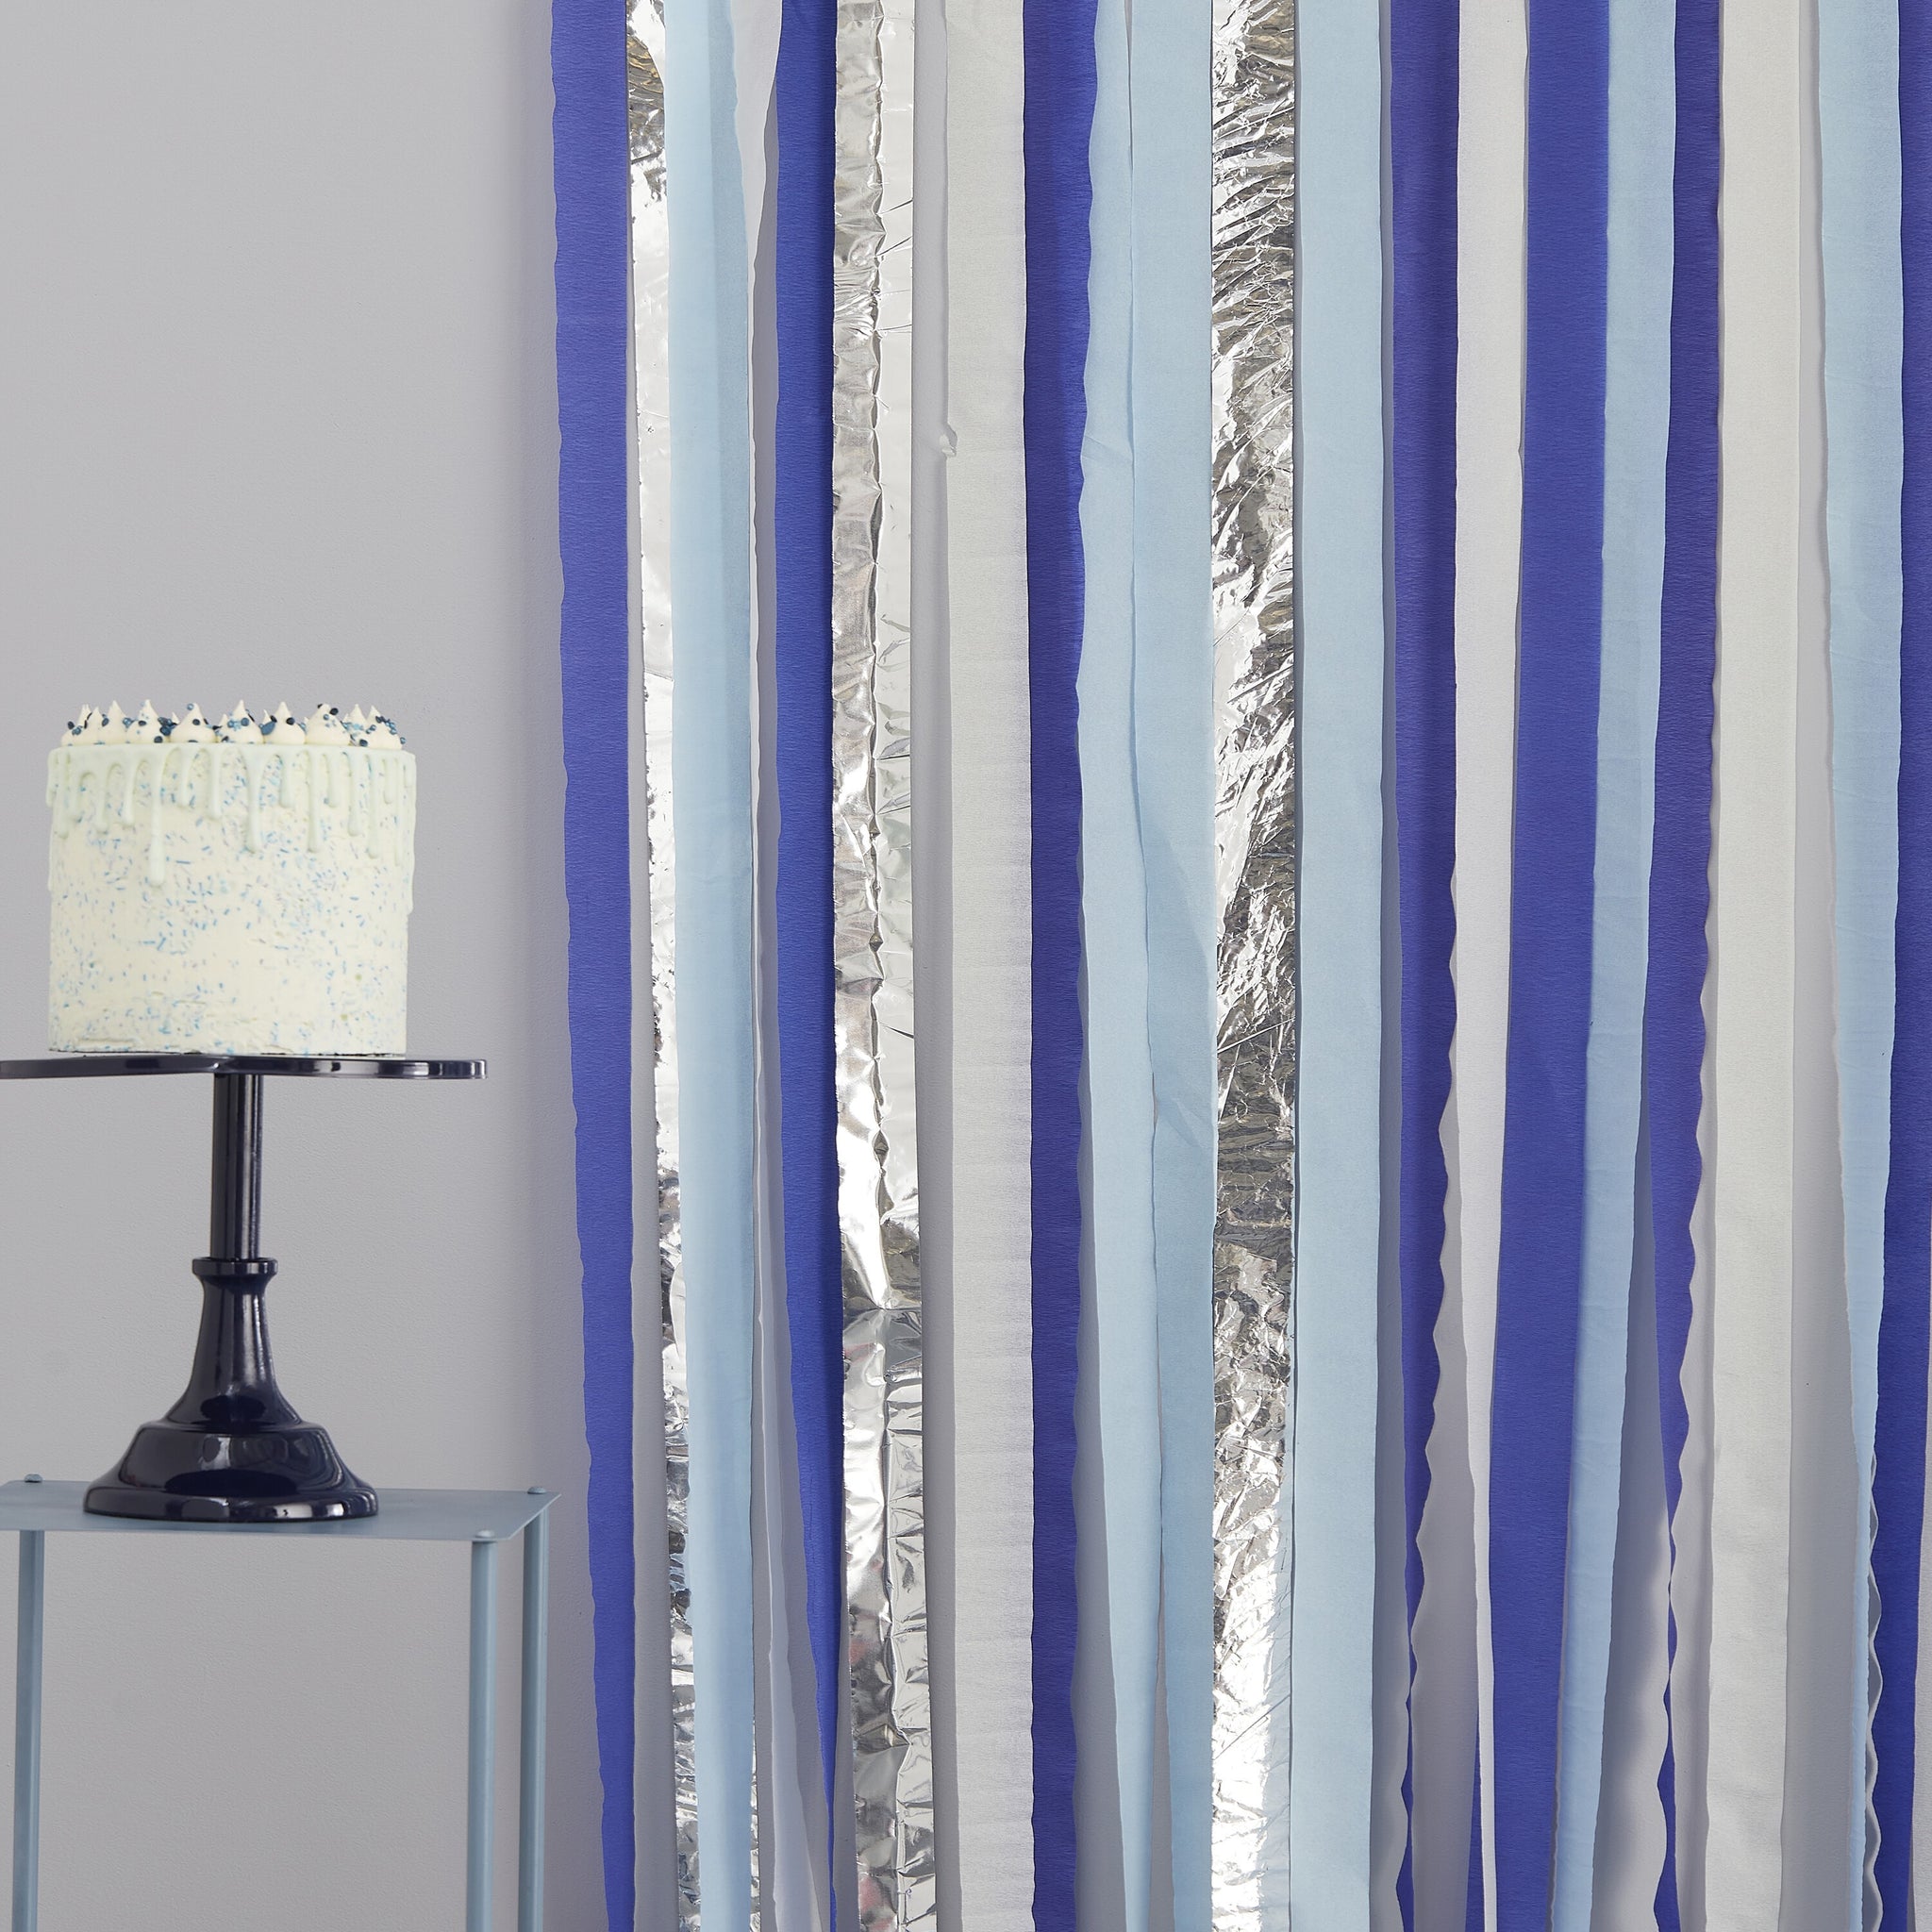 Blue and Silver Metallic Party Streamer Backdrop - The Pretty Prop Shop Parties